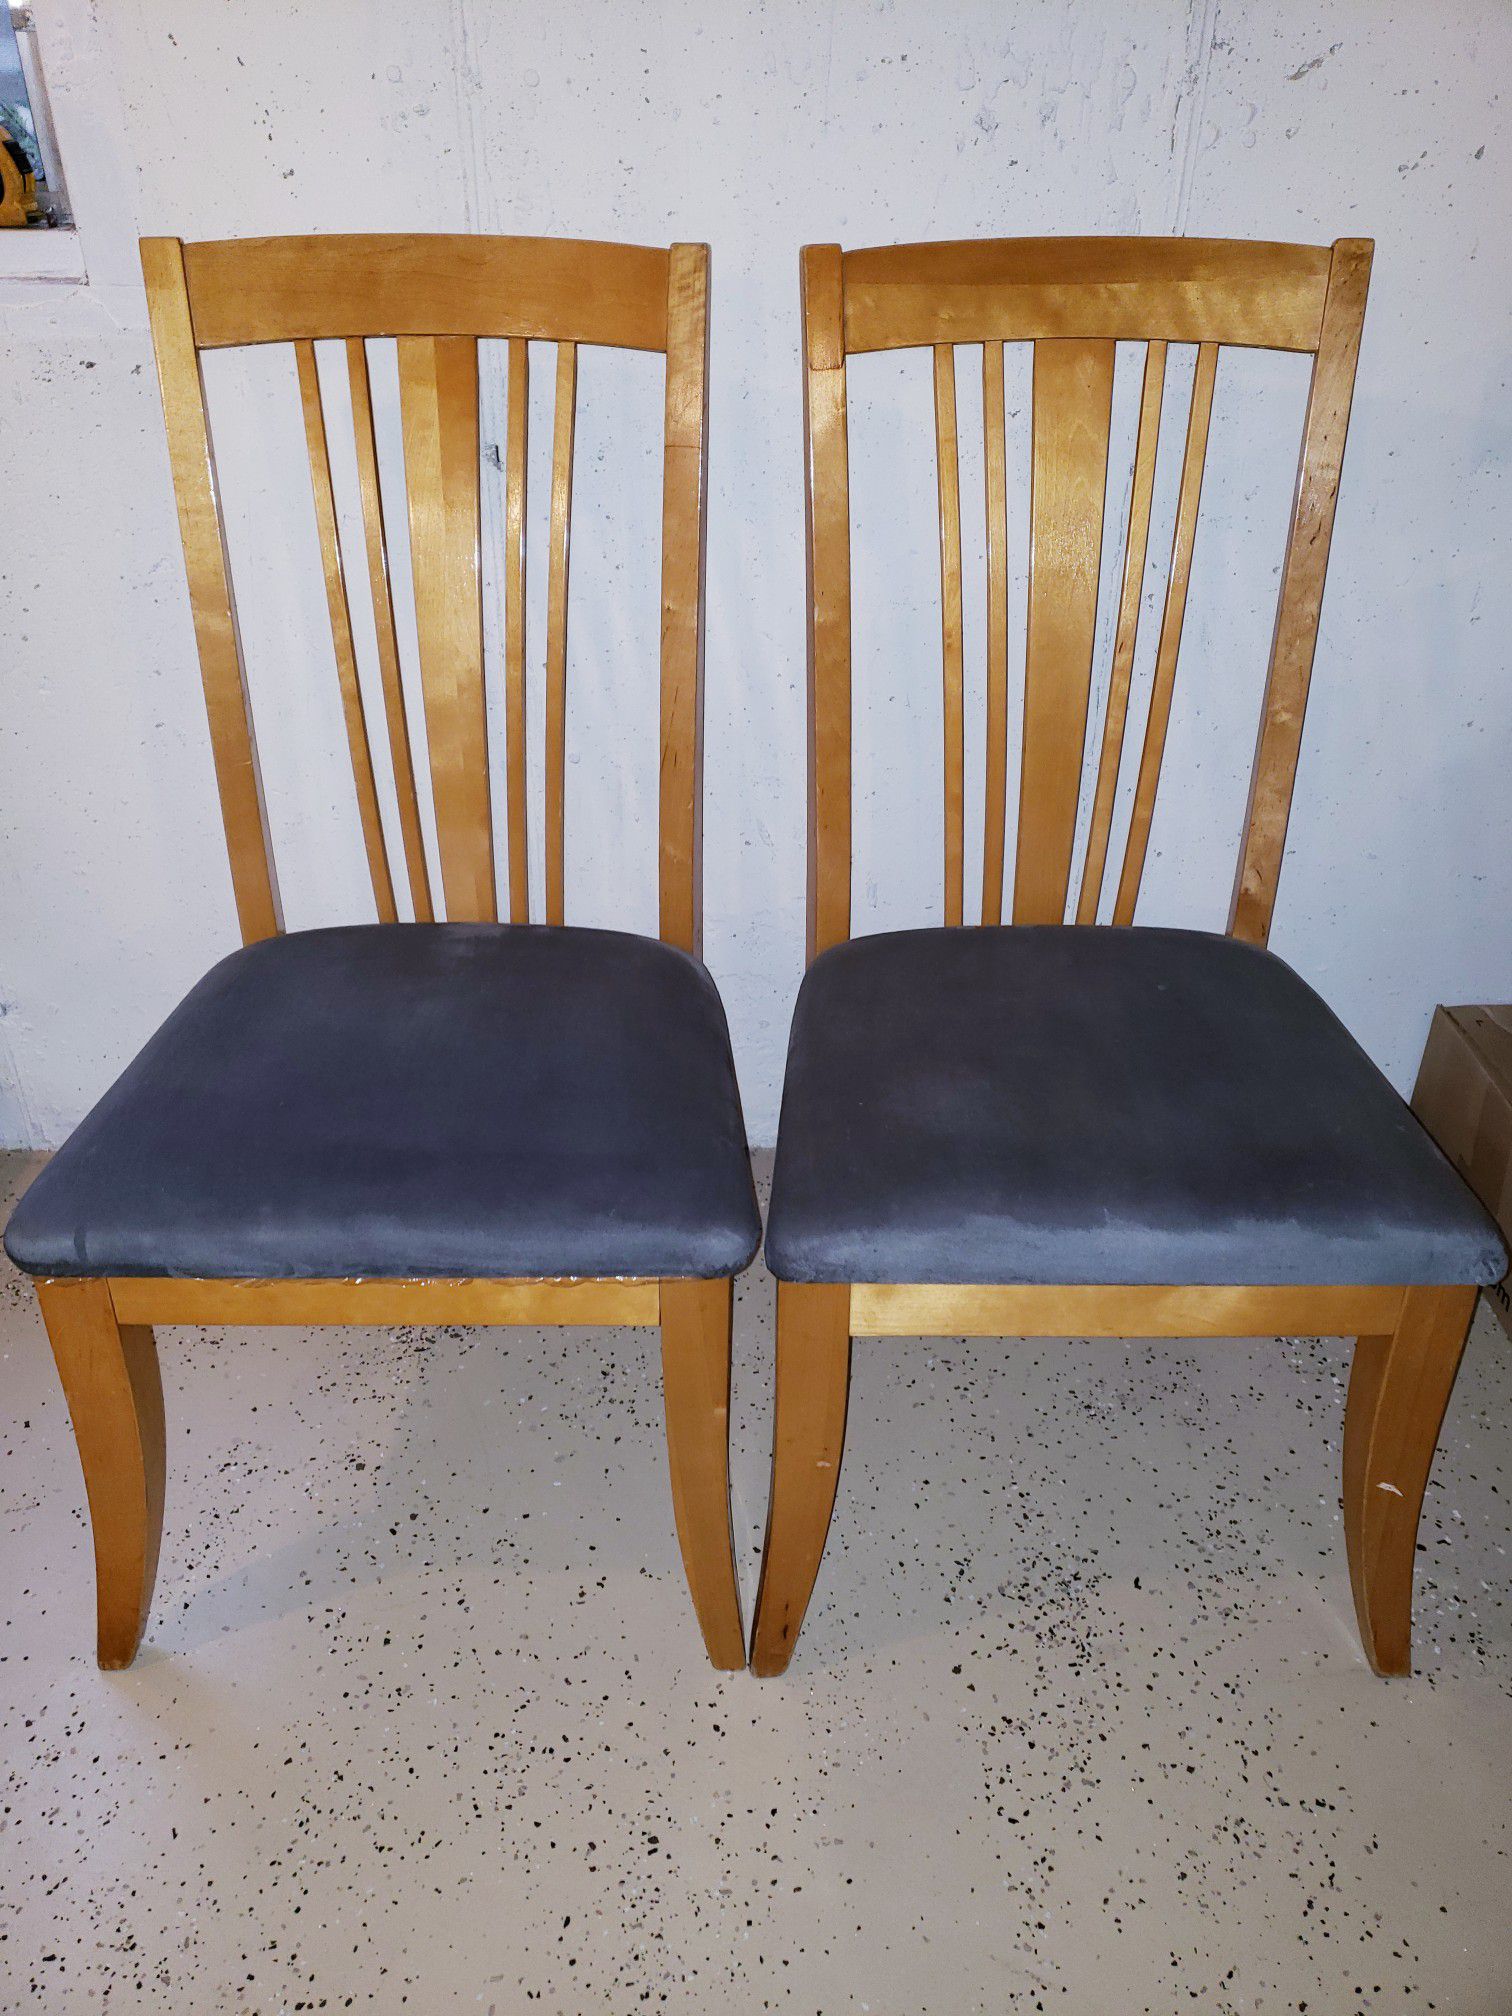 LIKE NEW, TWO DINING ROOM CHAIRS ONLY WITH FOREST GREEN SOFT FABRIC.